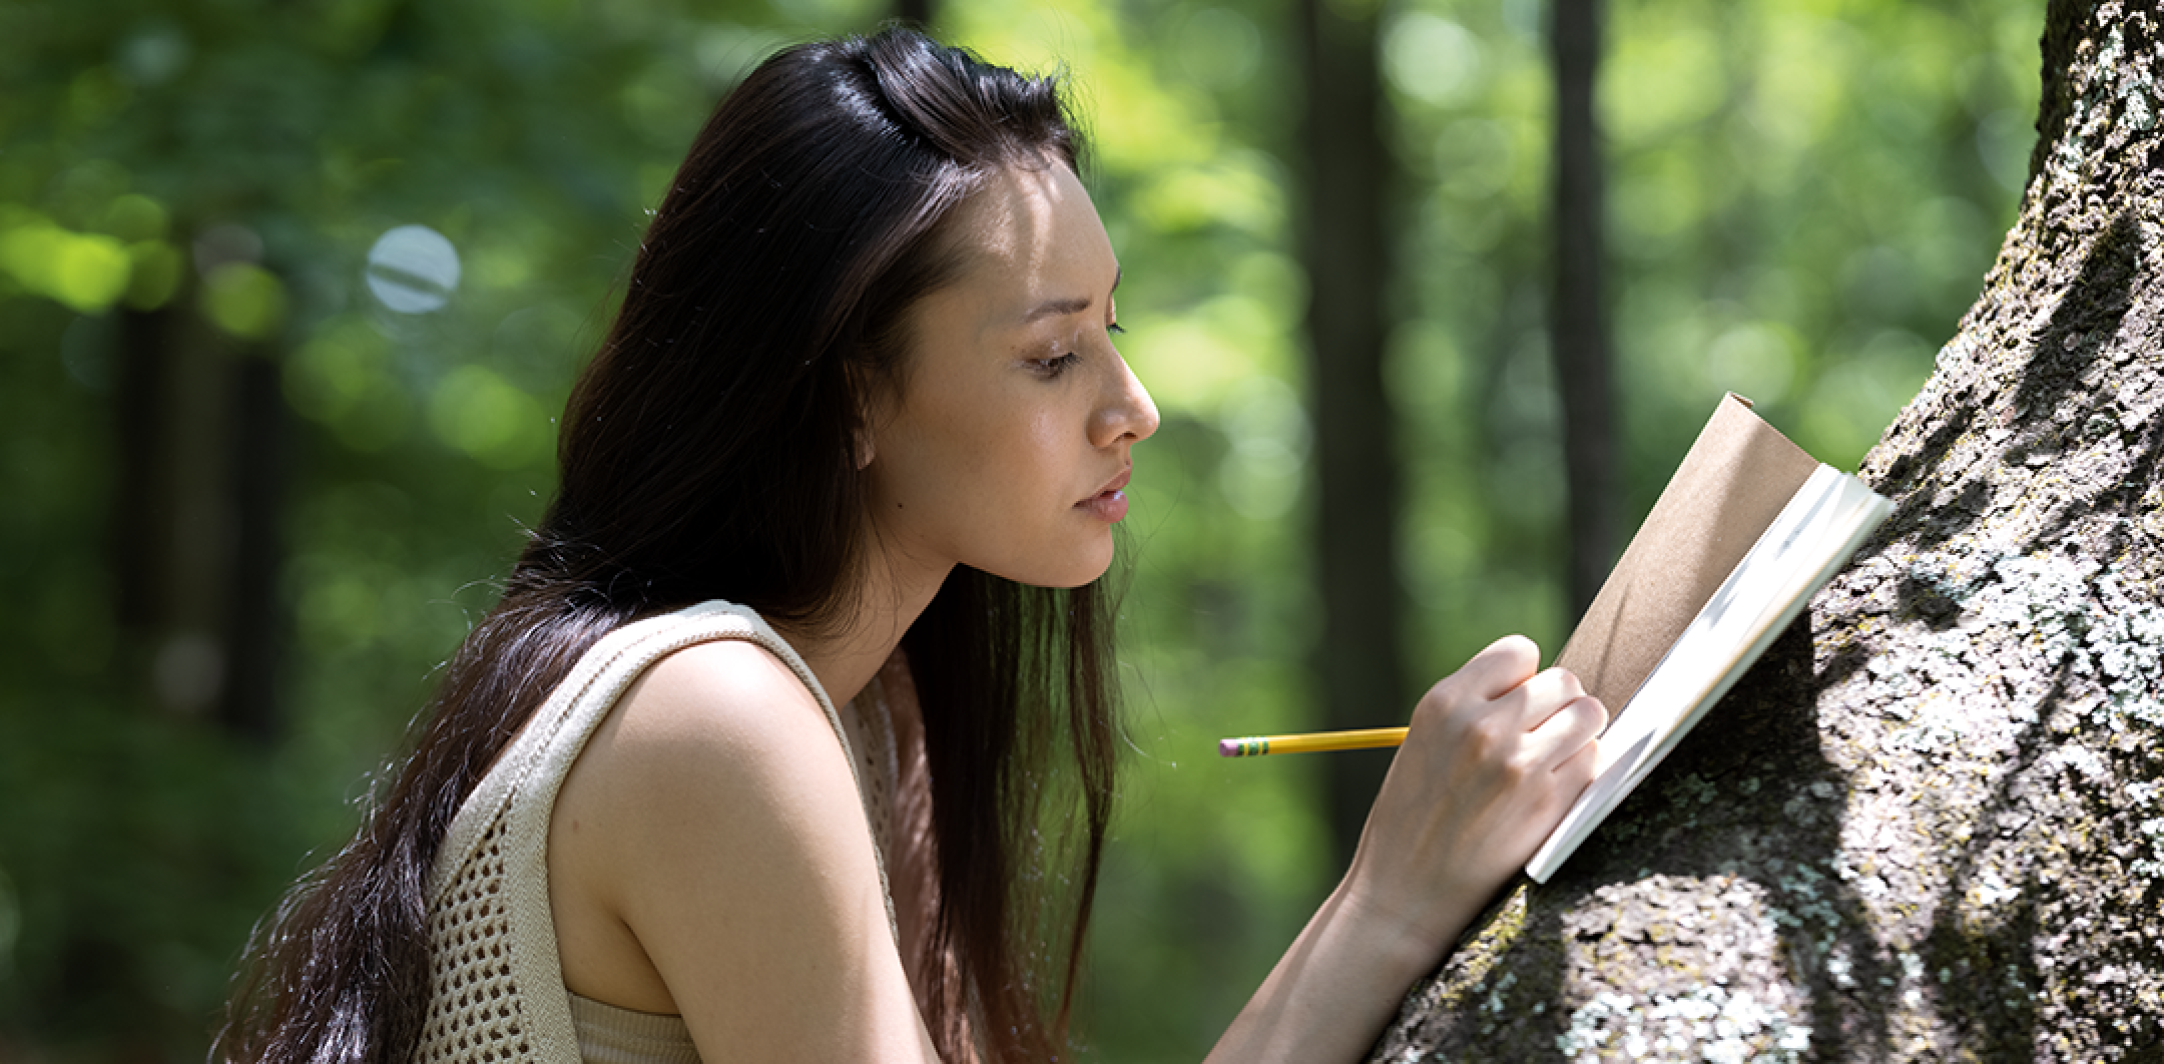 Lady journaling in the forest